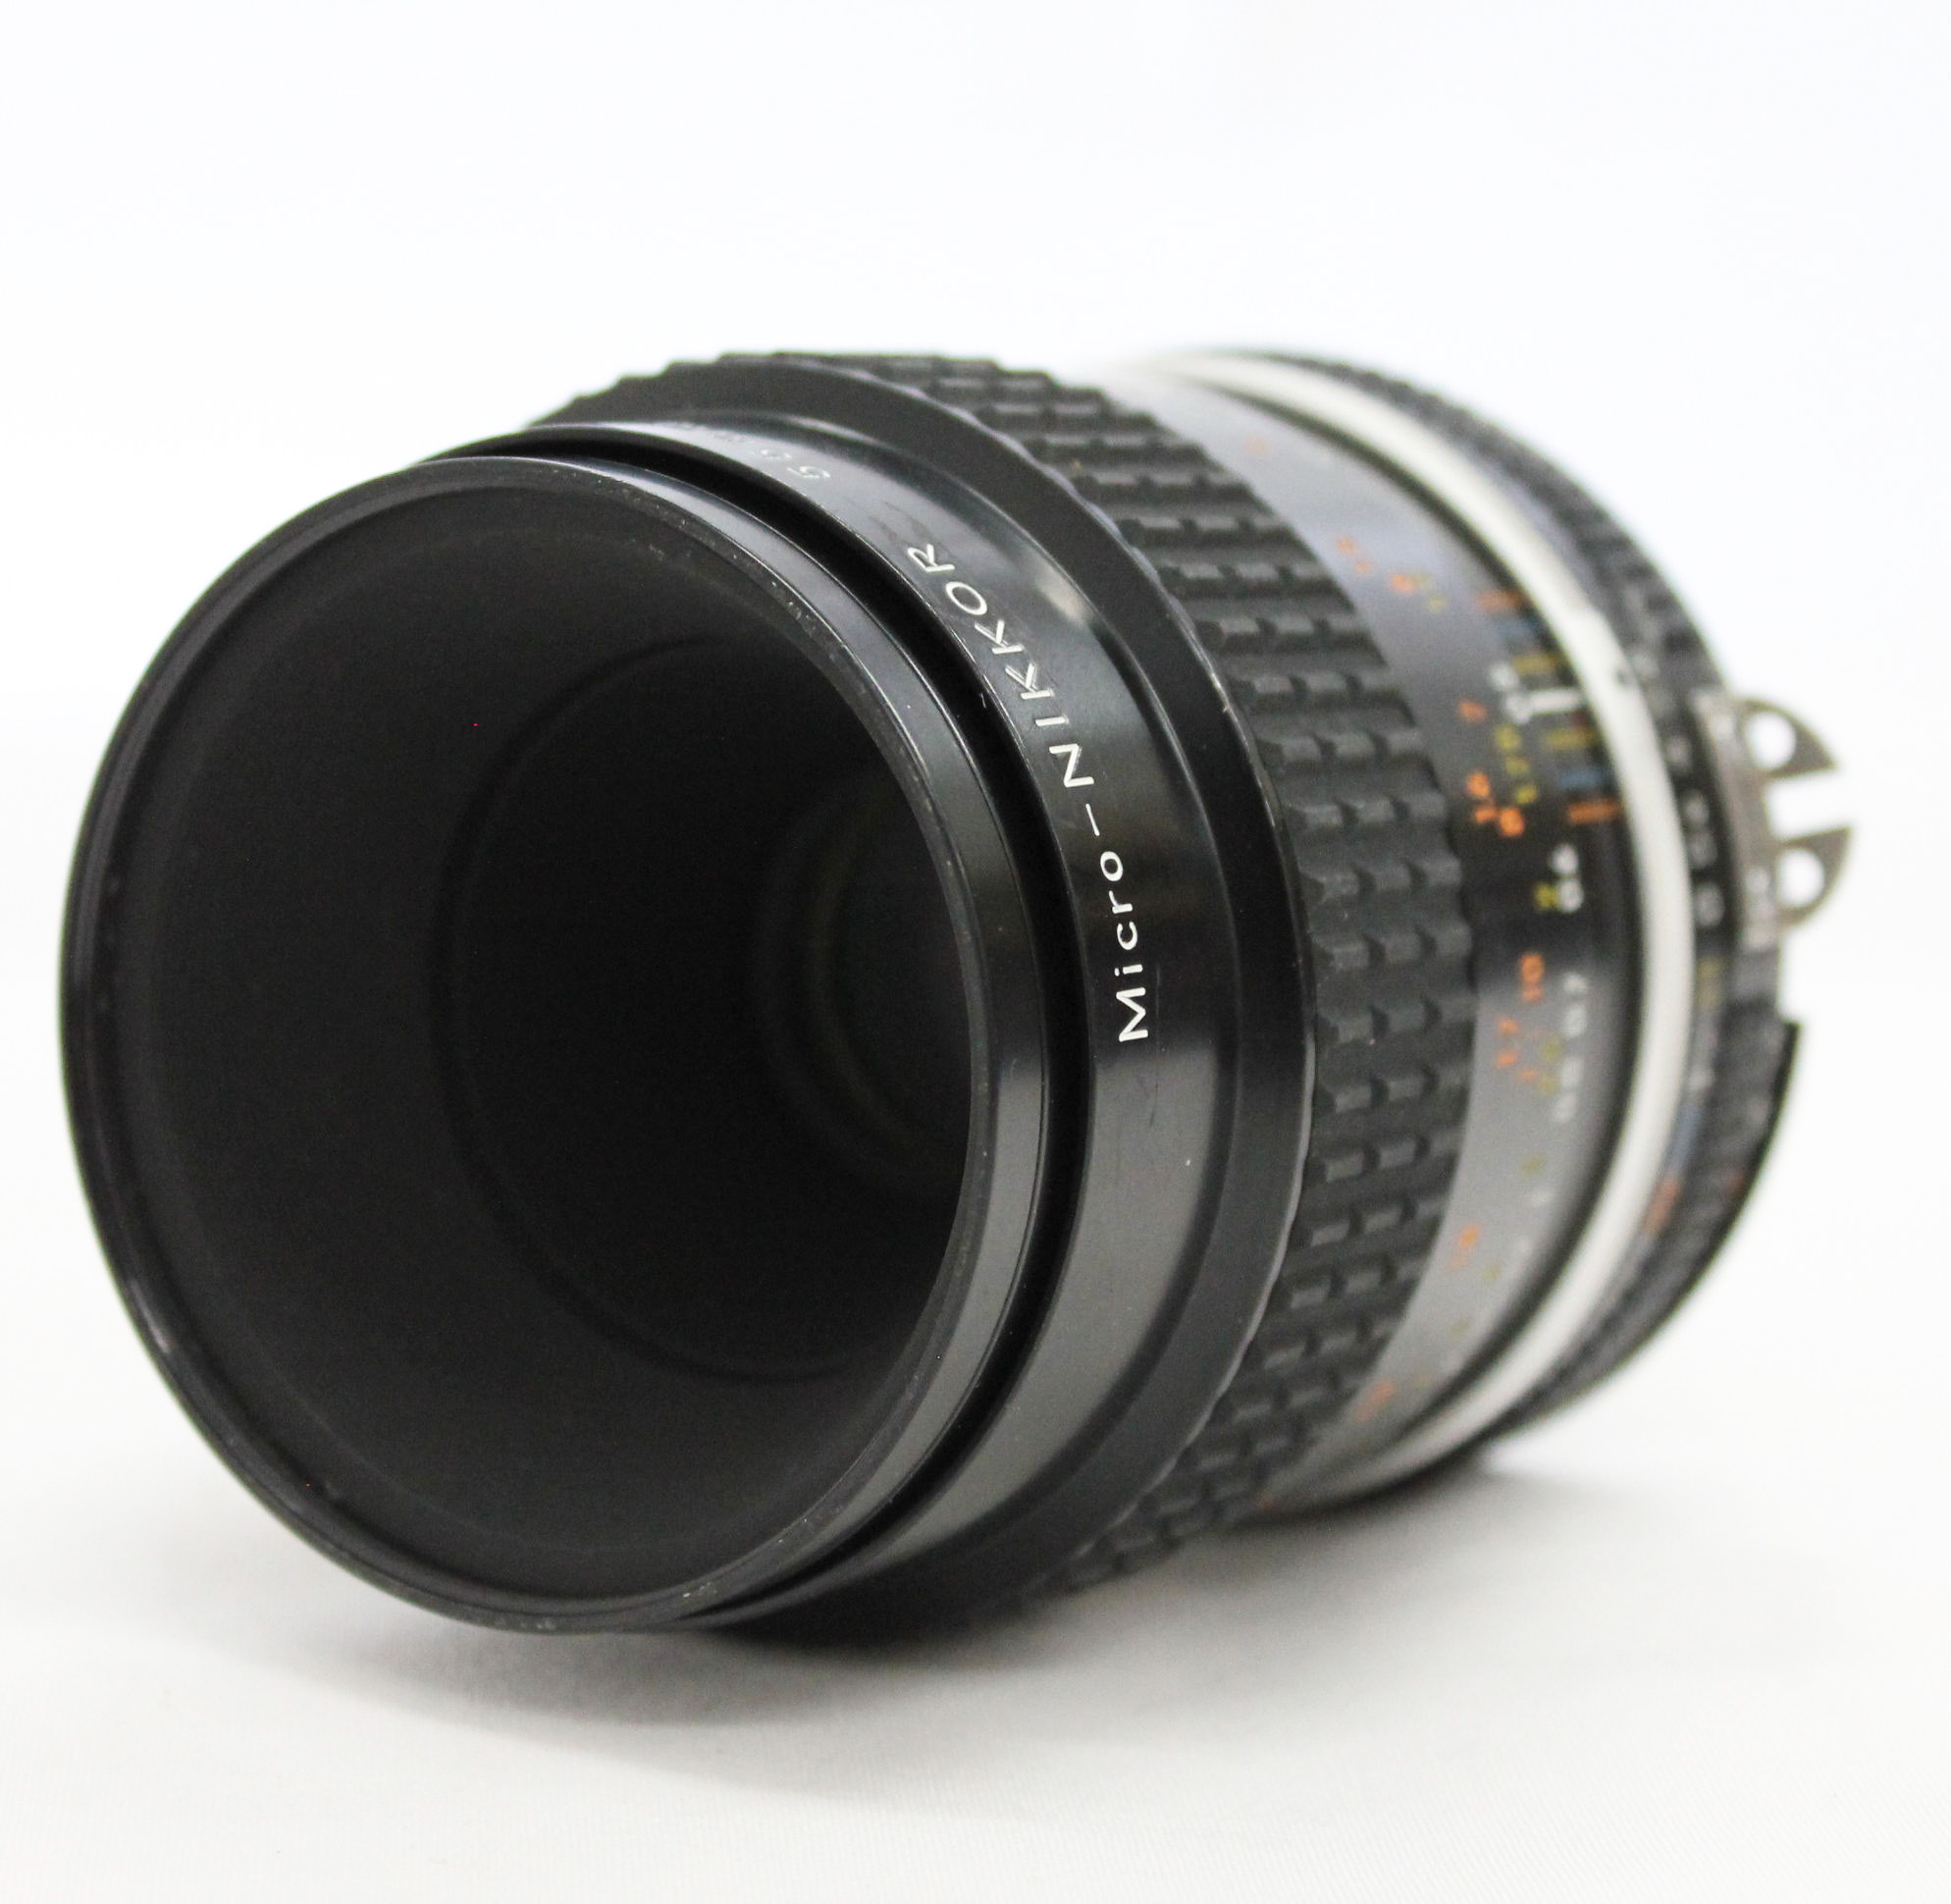 Japan Used Camera Shop | [Excellent++++] Nikon Ai-s Micro-NIKKOR 55mm F2.8 MF Lens from Japan